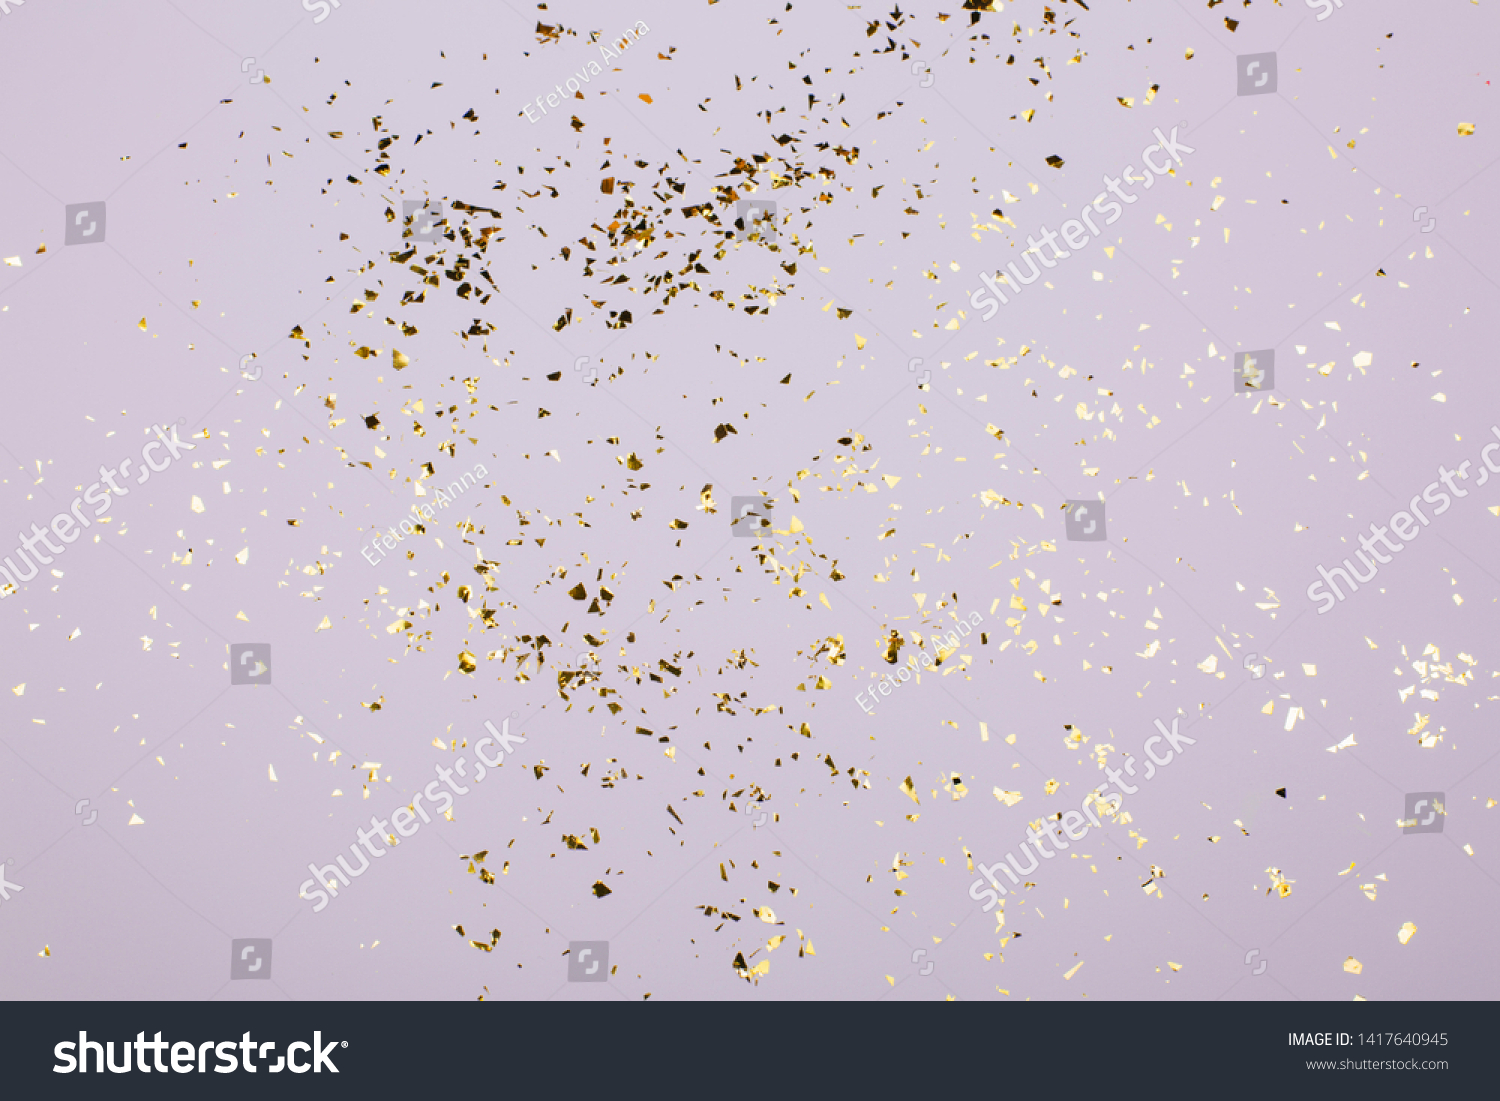 Golden flying sparkles on grey holiday background. Festive backdrop for your projects. #1417640945